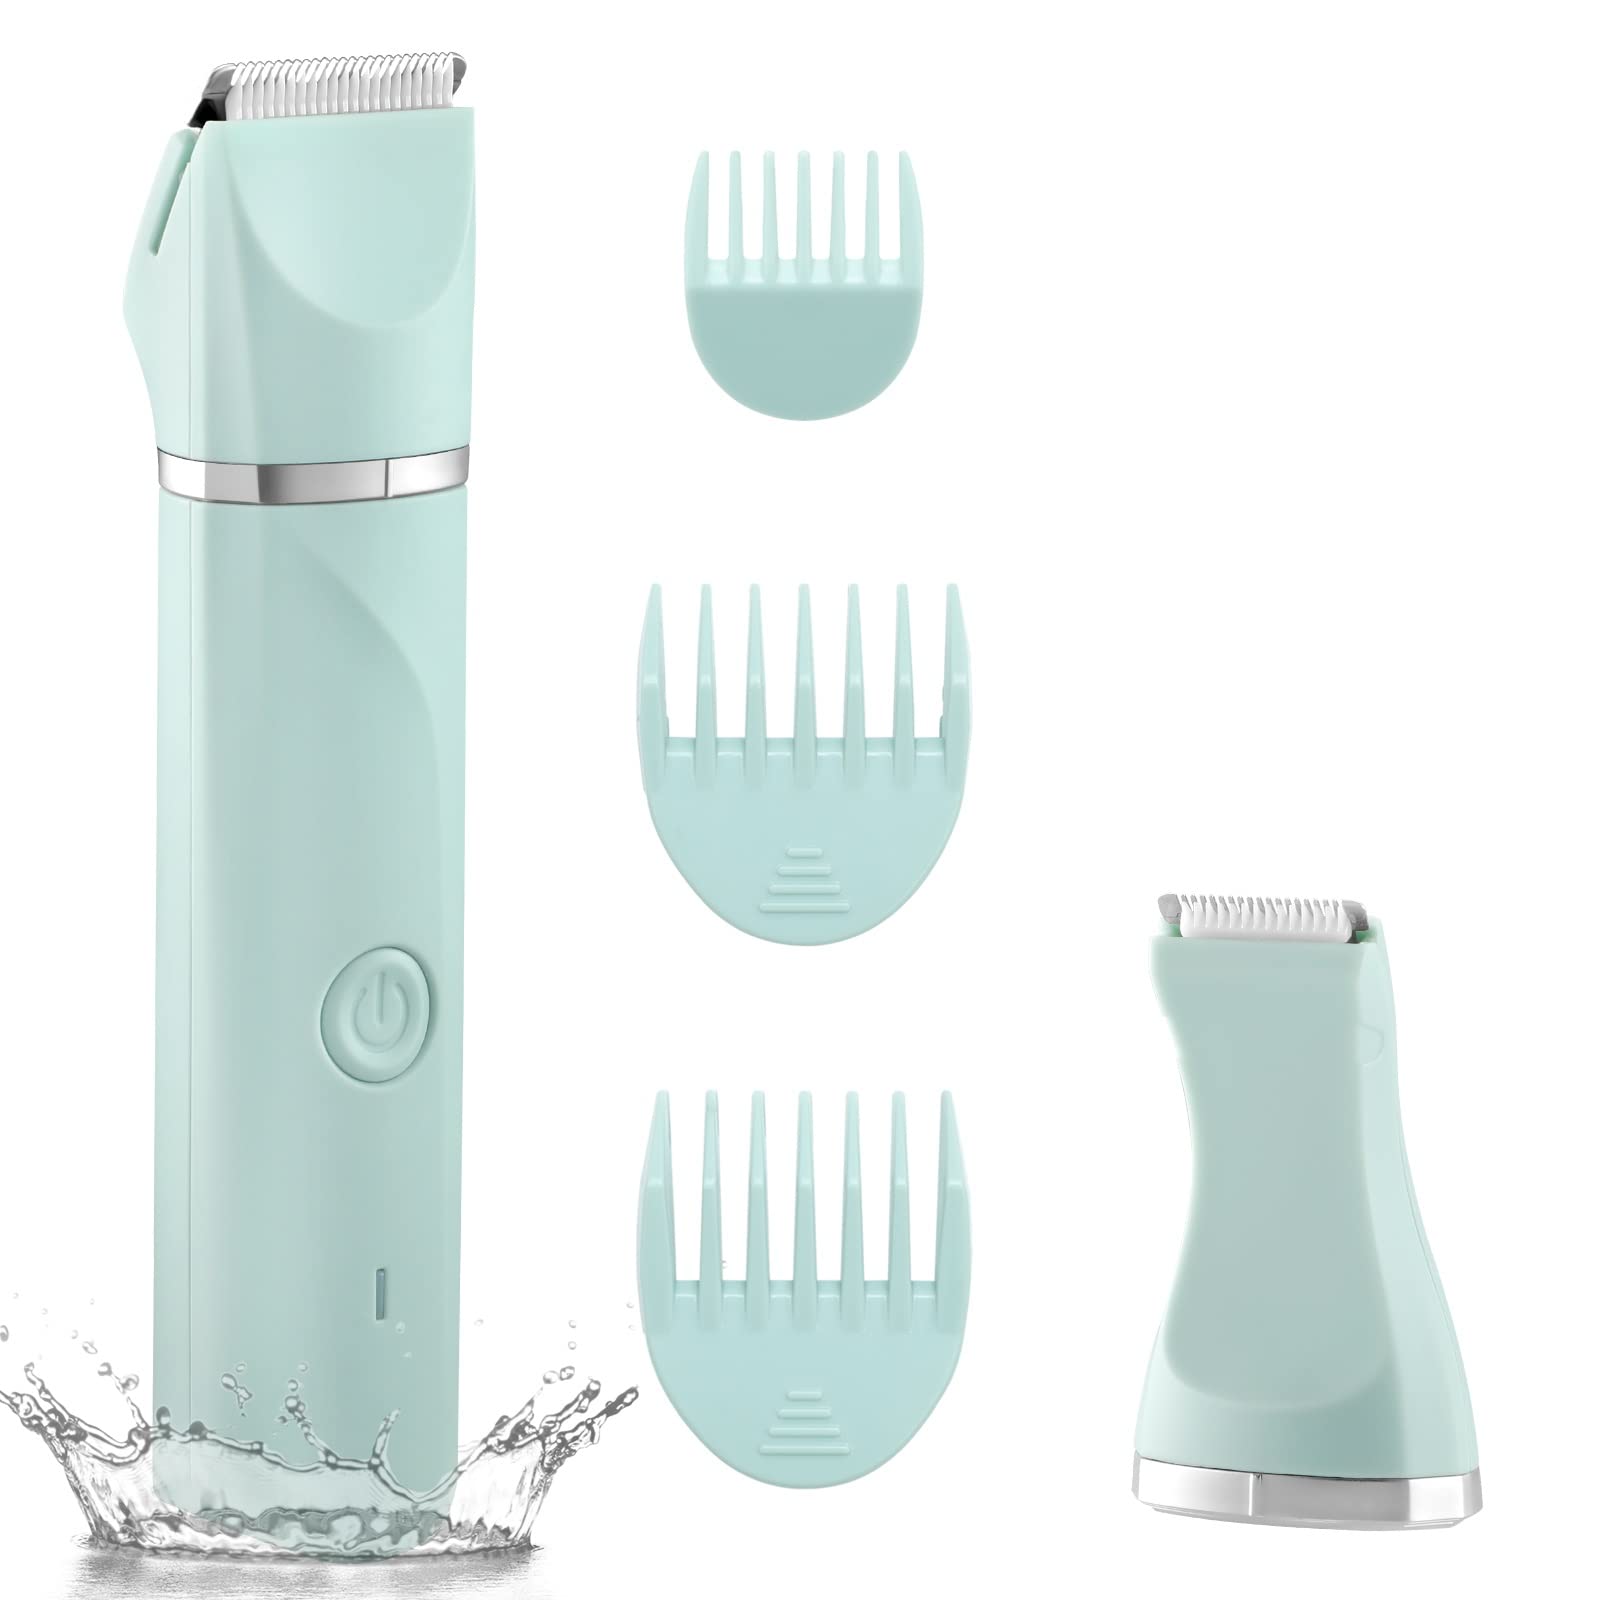 AREYZIN Waterproof Bikini Trimmer Women Electric Razor for Legs Pubic Hair Rechargeable Shaver Removal with Snap-in Ceramic Blad